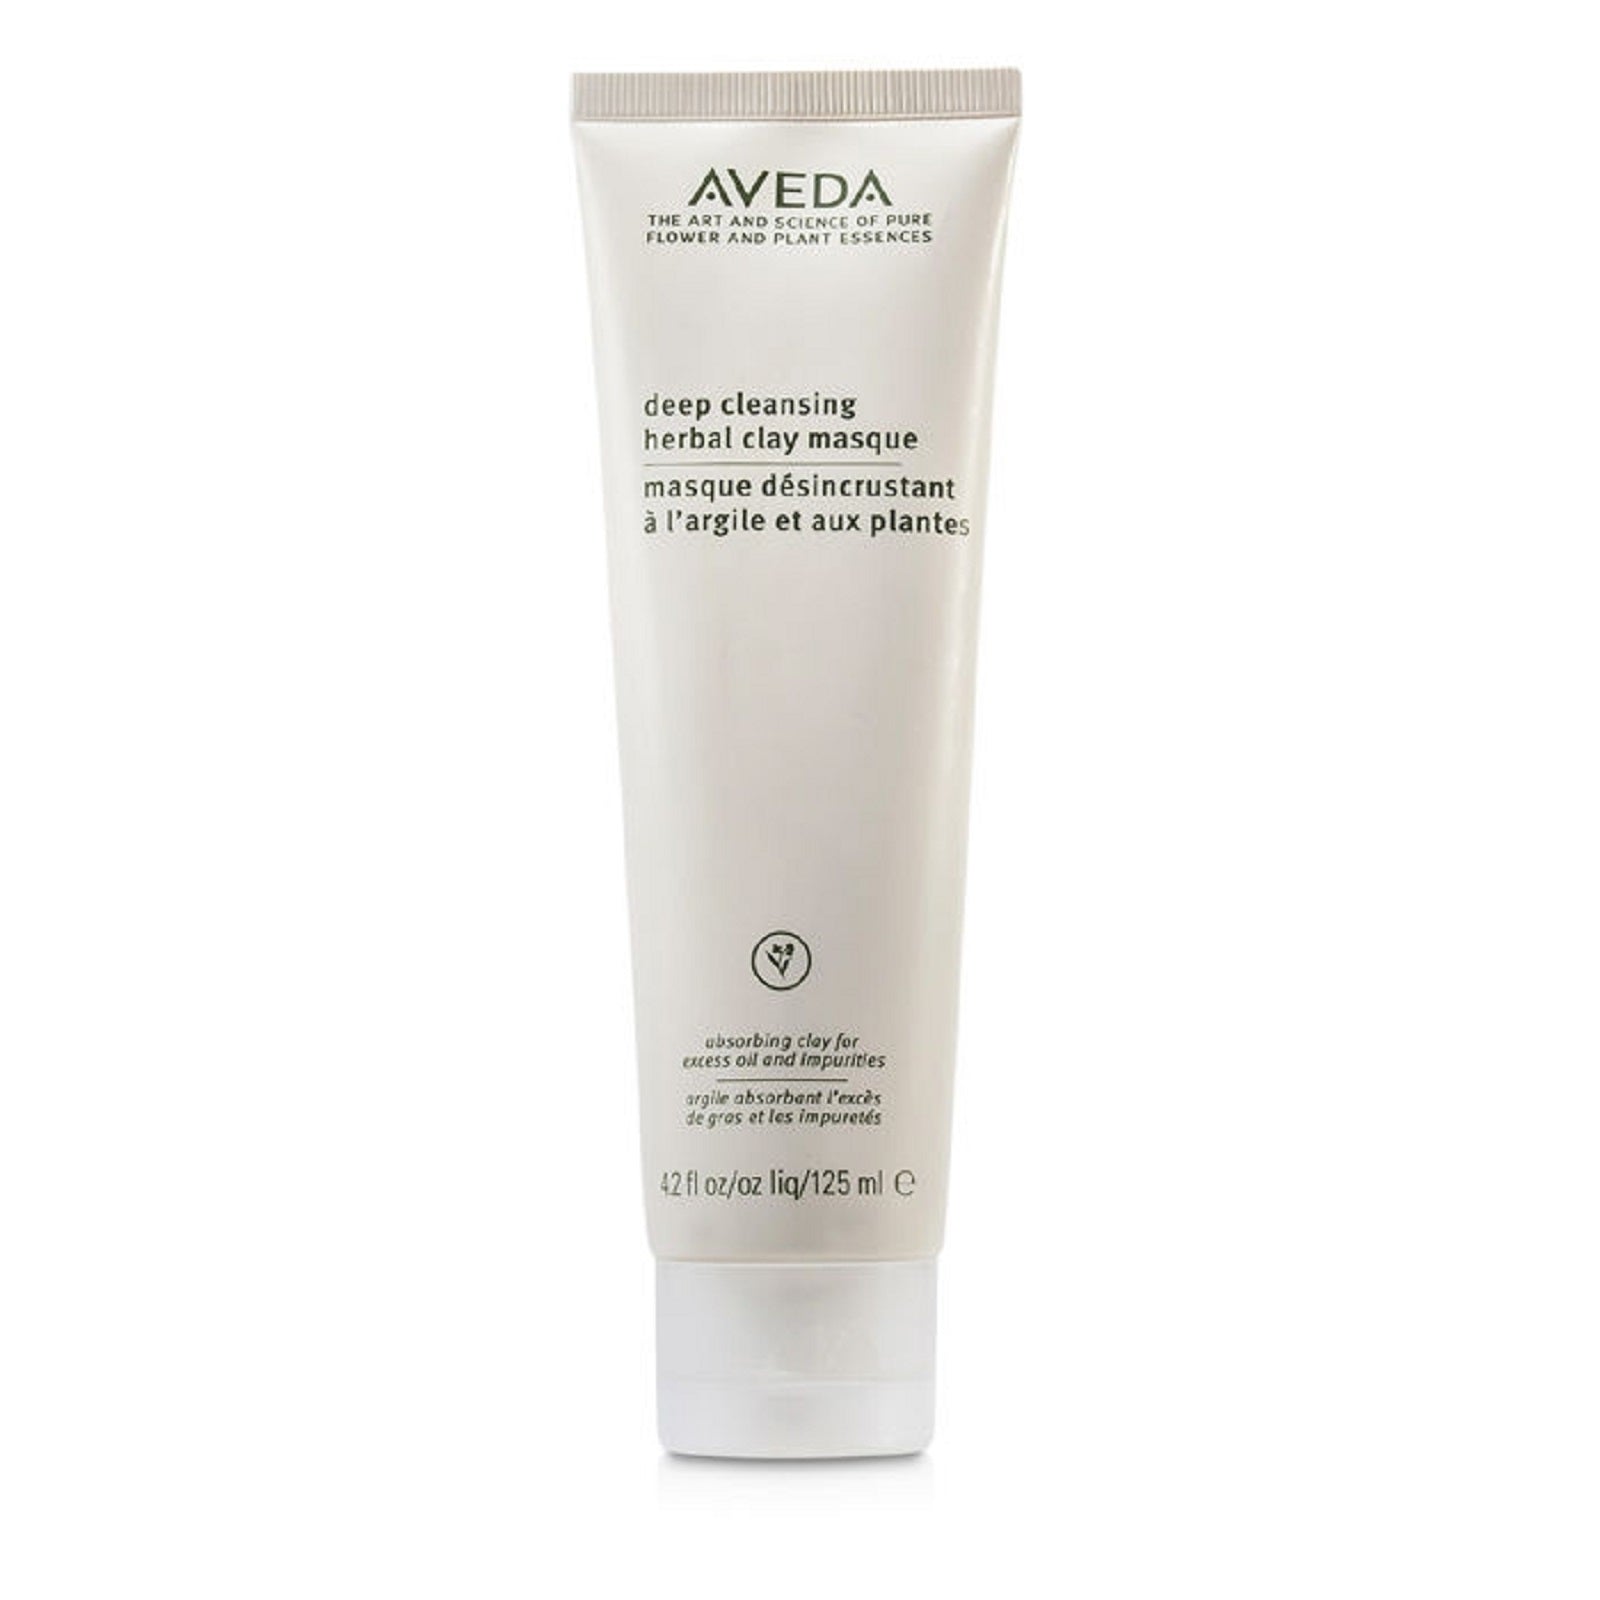 AVEDA Deep Cleansing Herbal Masque 125ml 4.2oz Discontinued